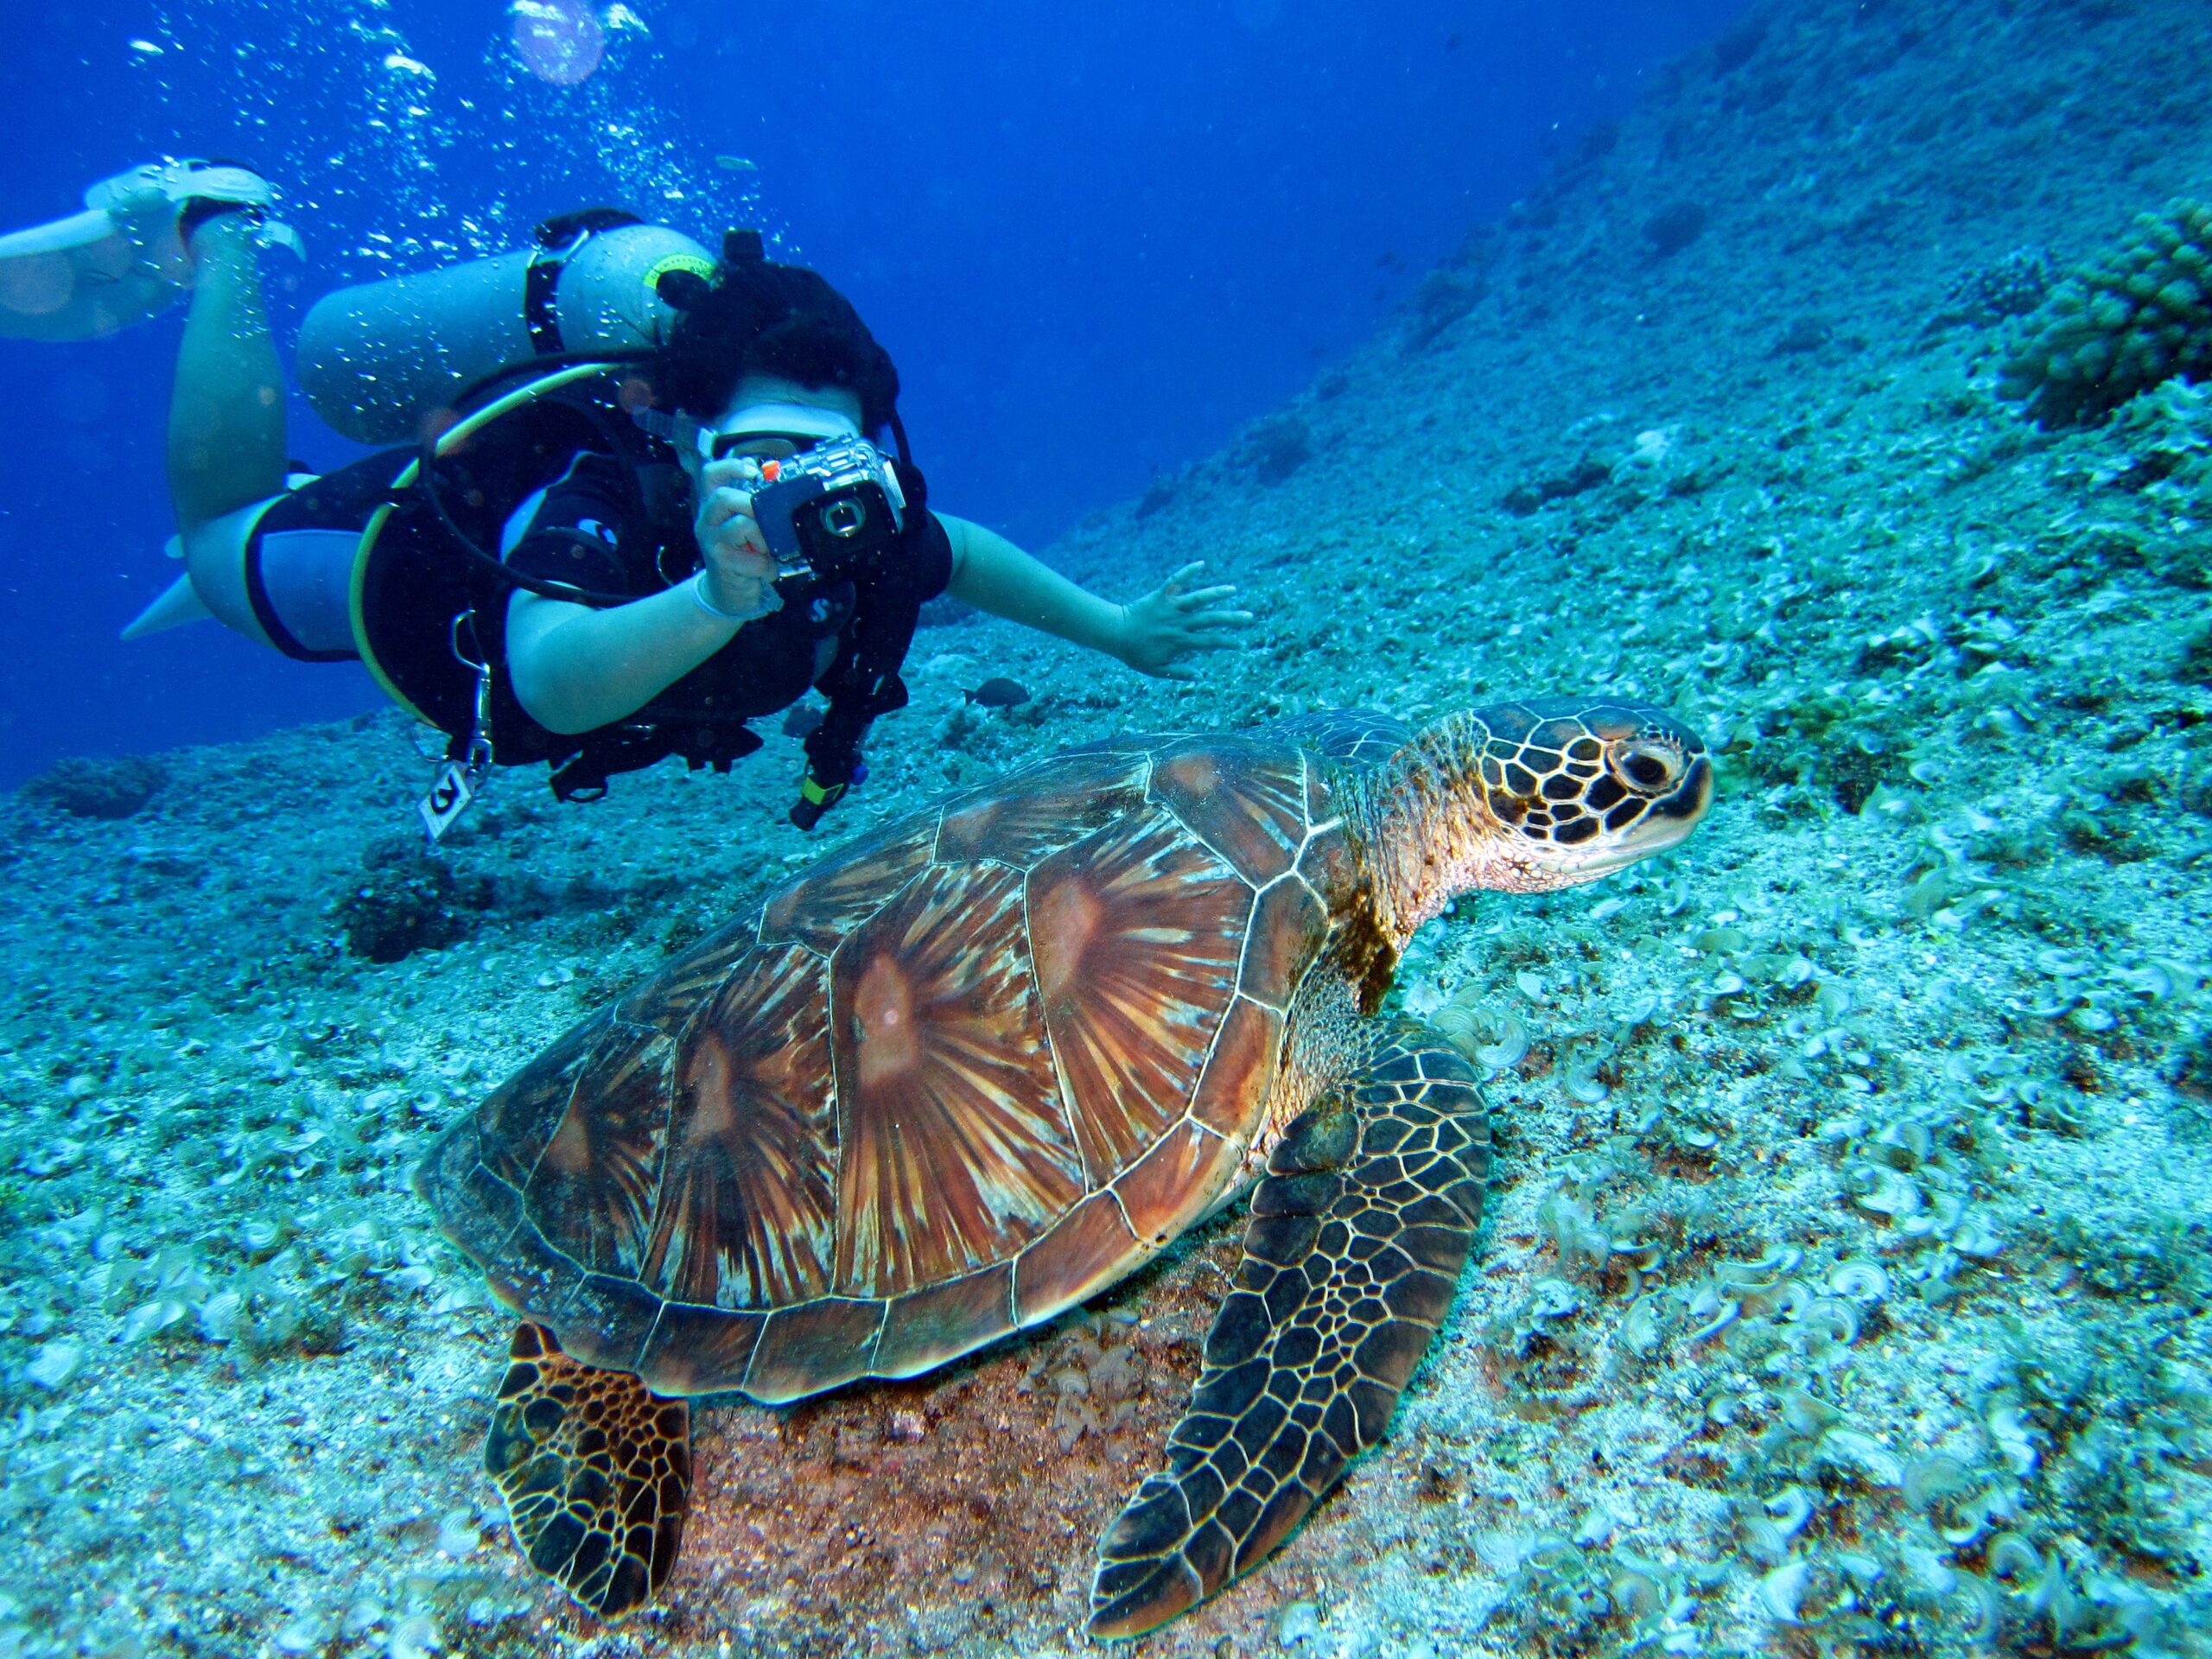 volunteering opportunities for students can include SCUBA diving with sea turtles